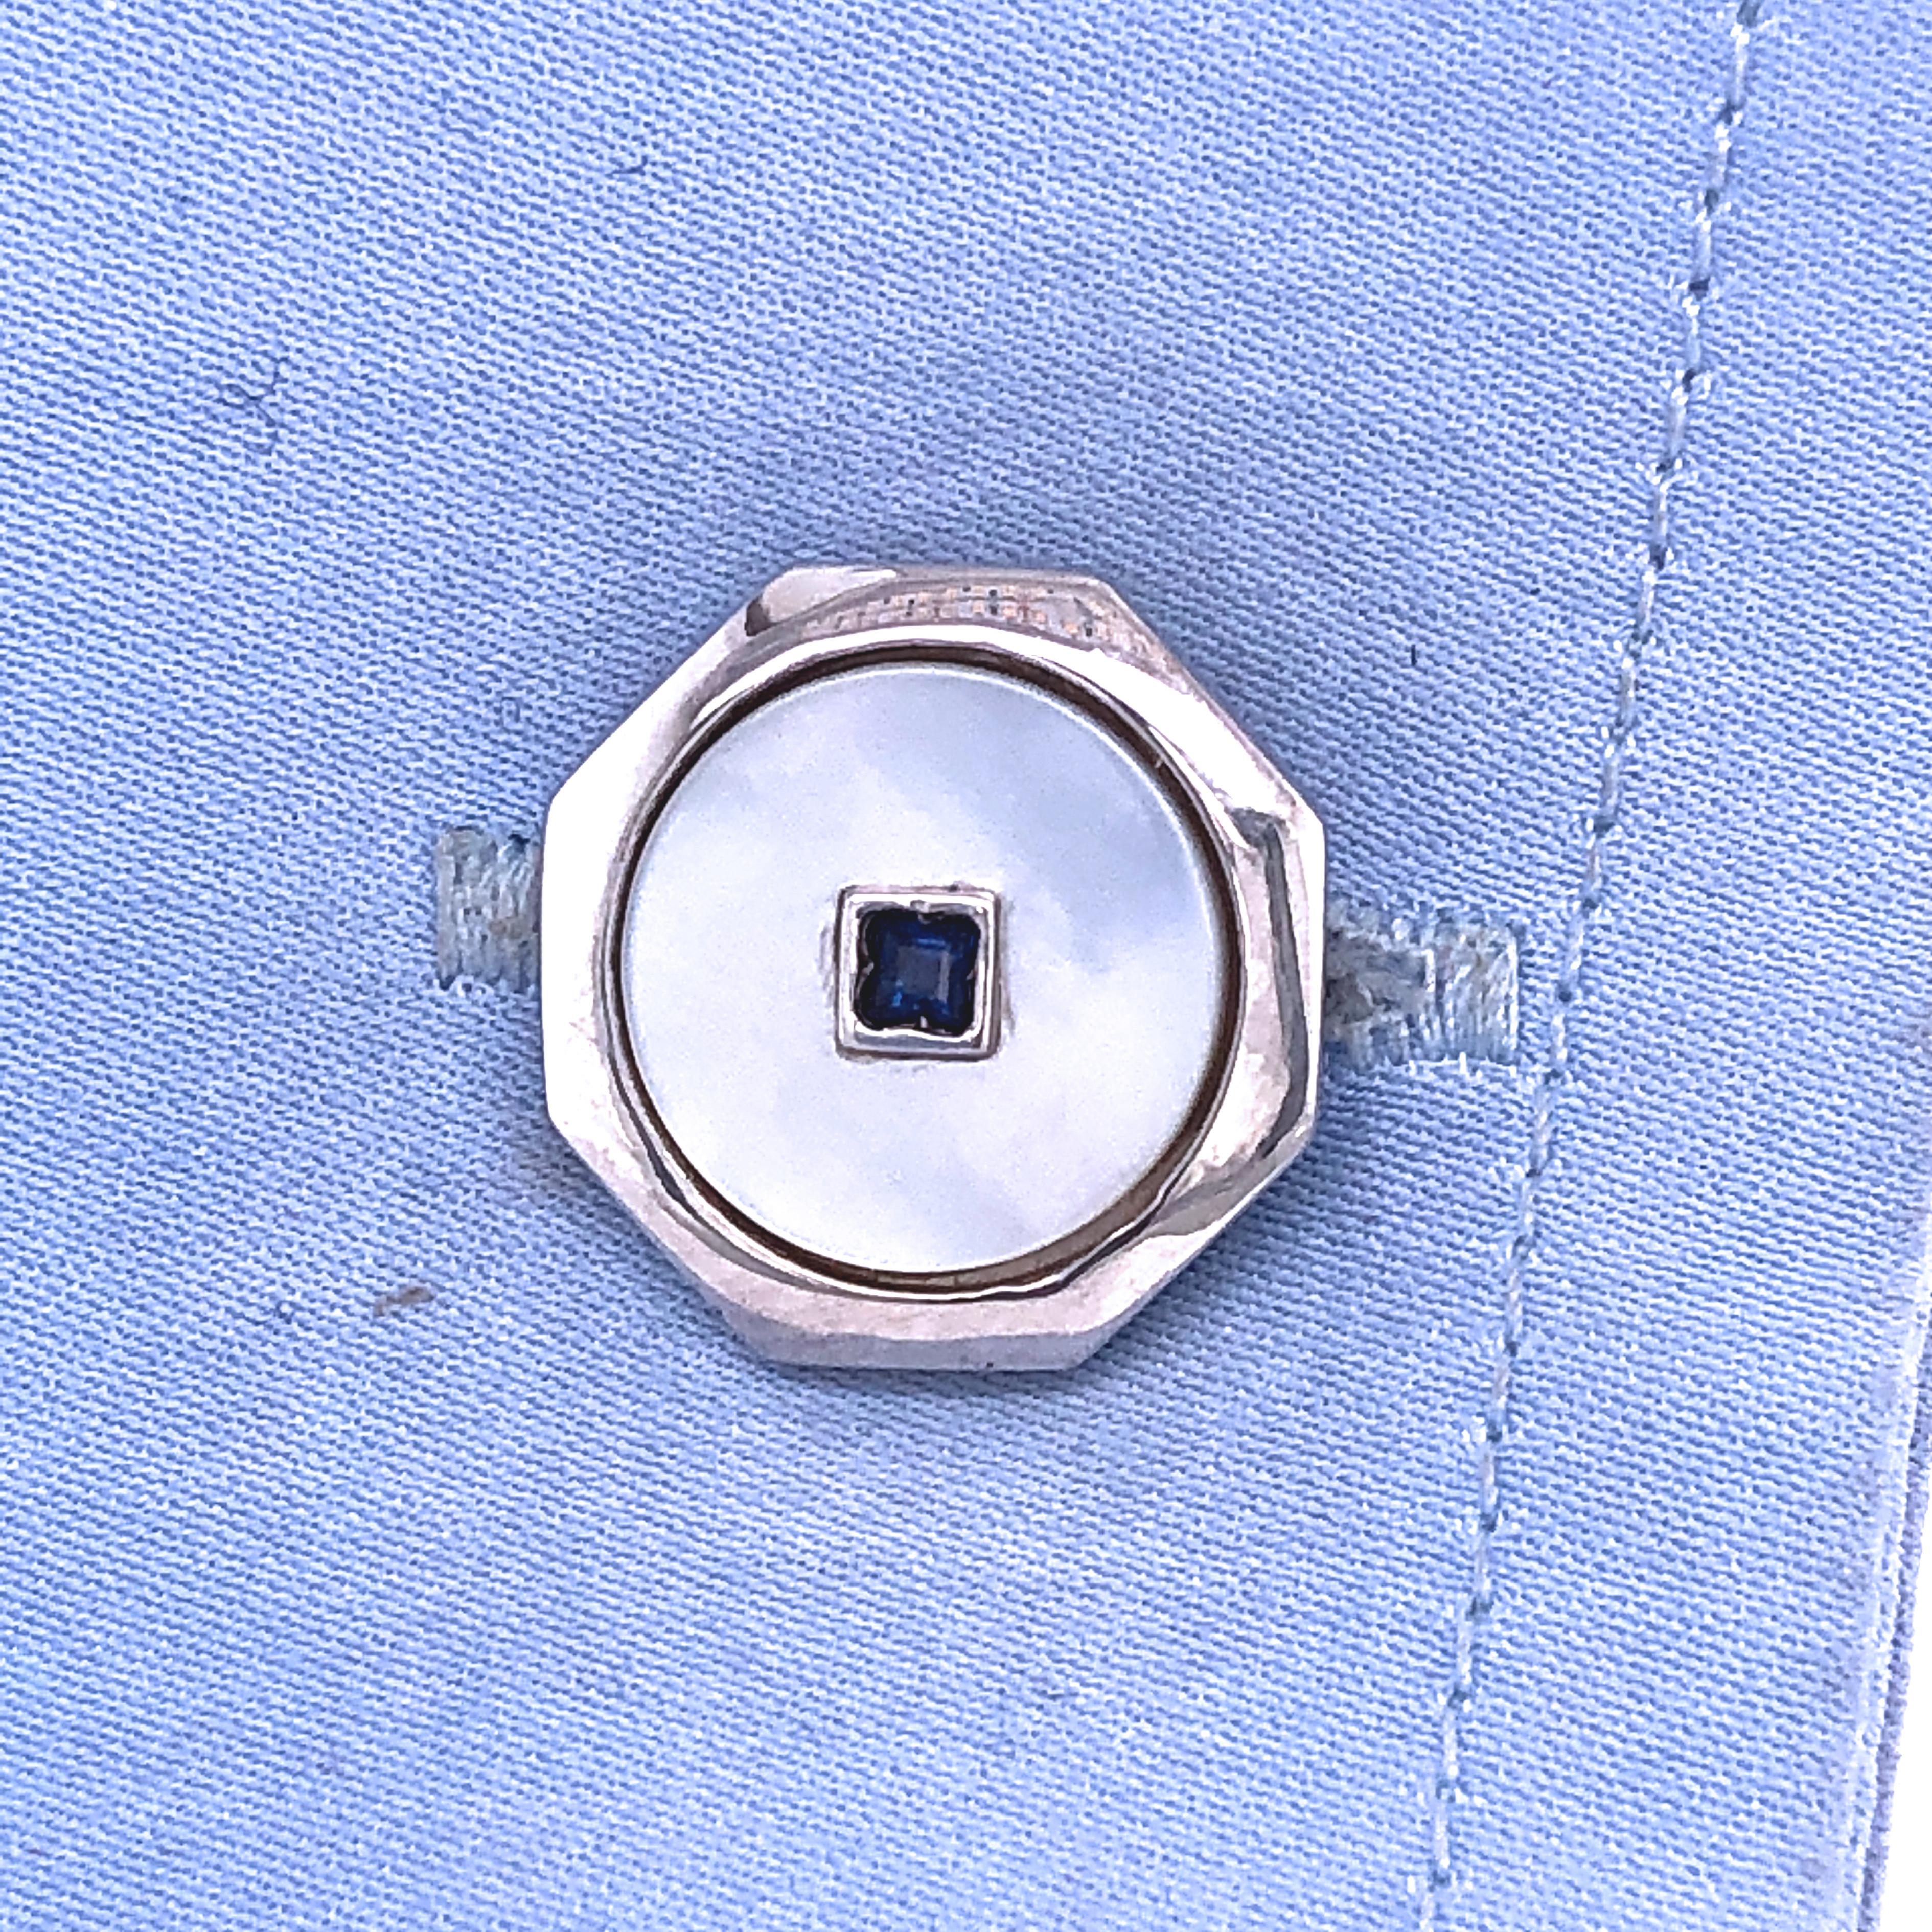 0.14 Natural Square Sapphire T-Bar Back White Gold Cufflinks 4